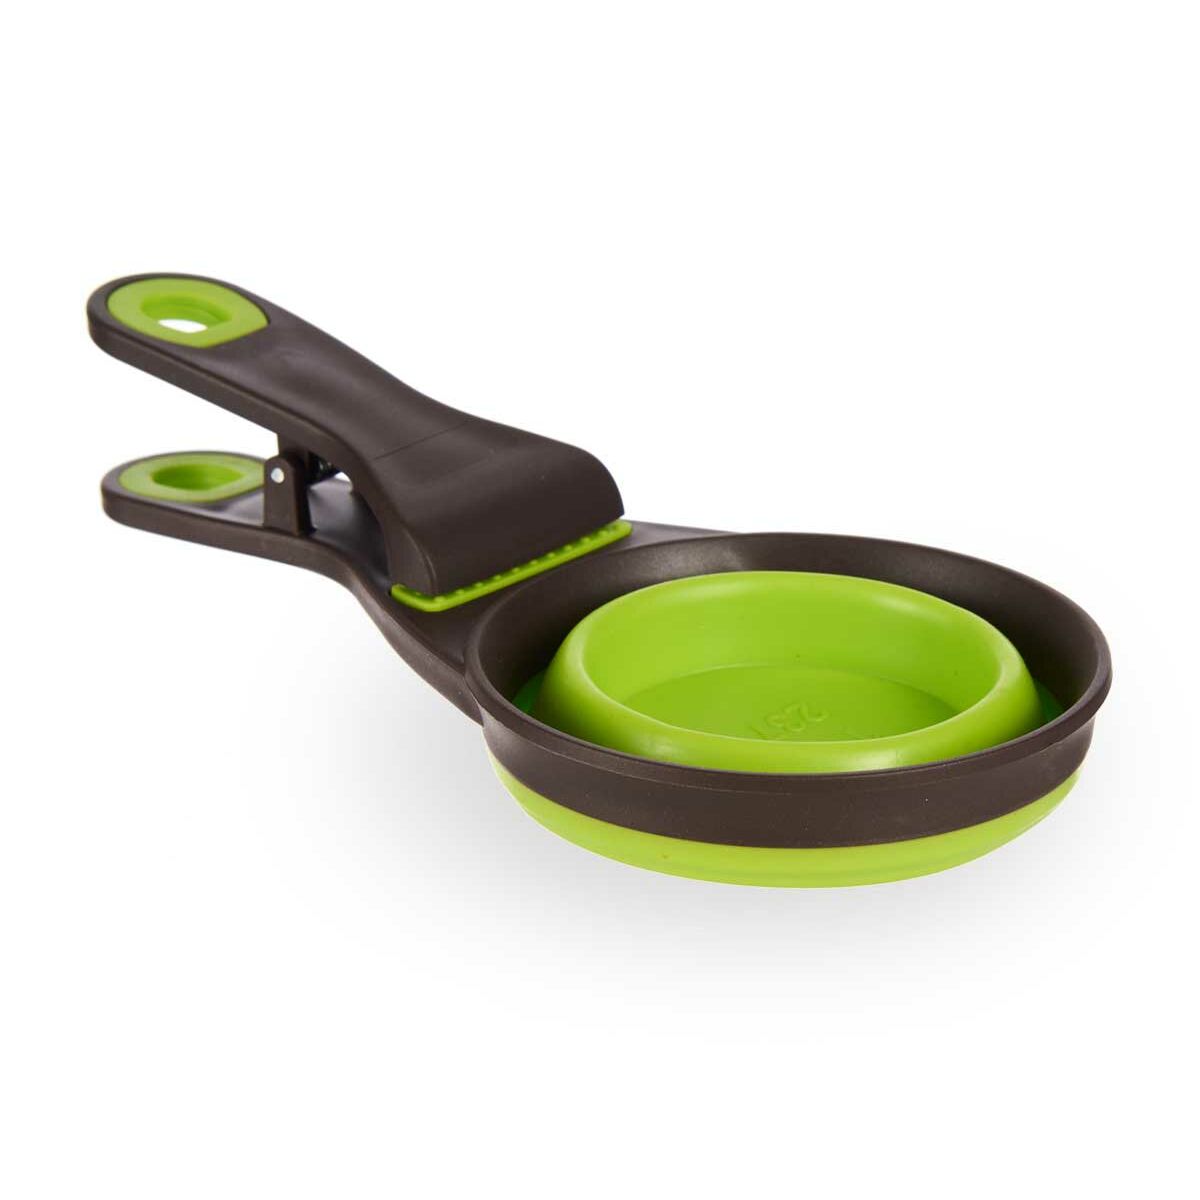 Measuring spoon 3-in-1 for pets